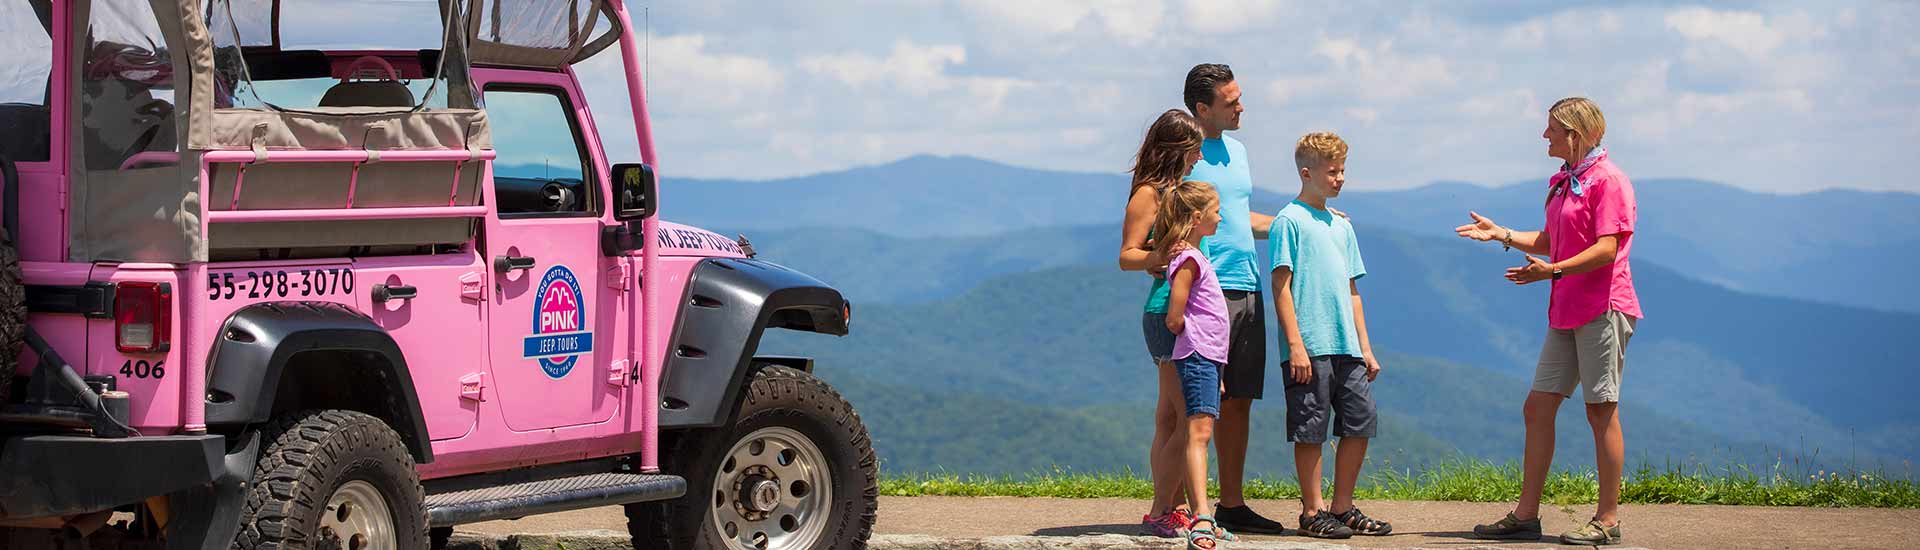 Newfound Gap tour guide talking to guests next to Pink® Jeep®, with Smoky Mountains blue ridge in background